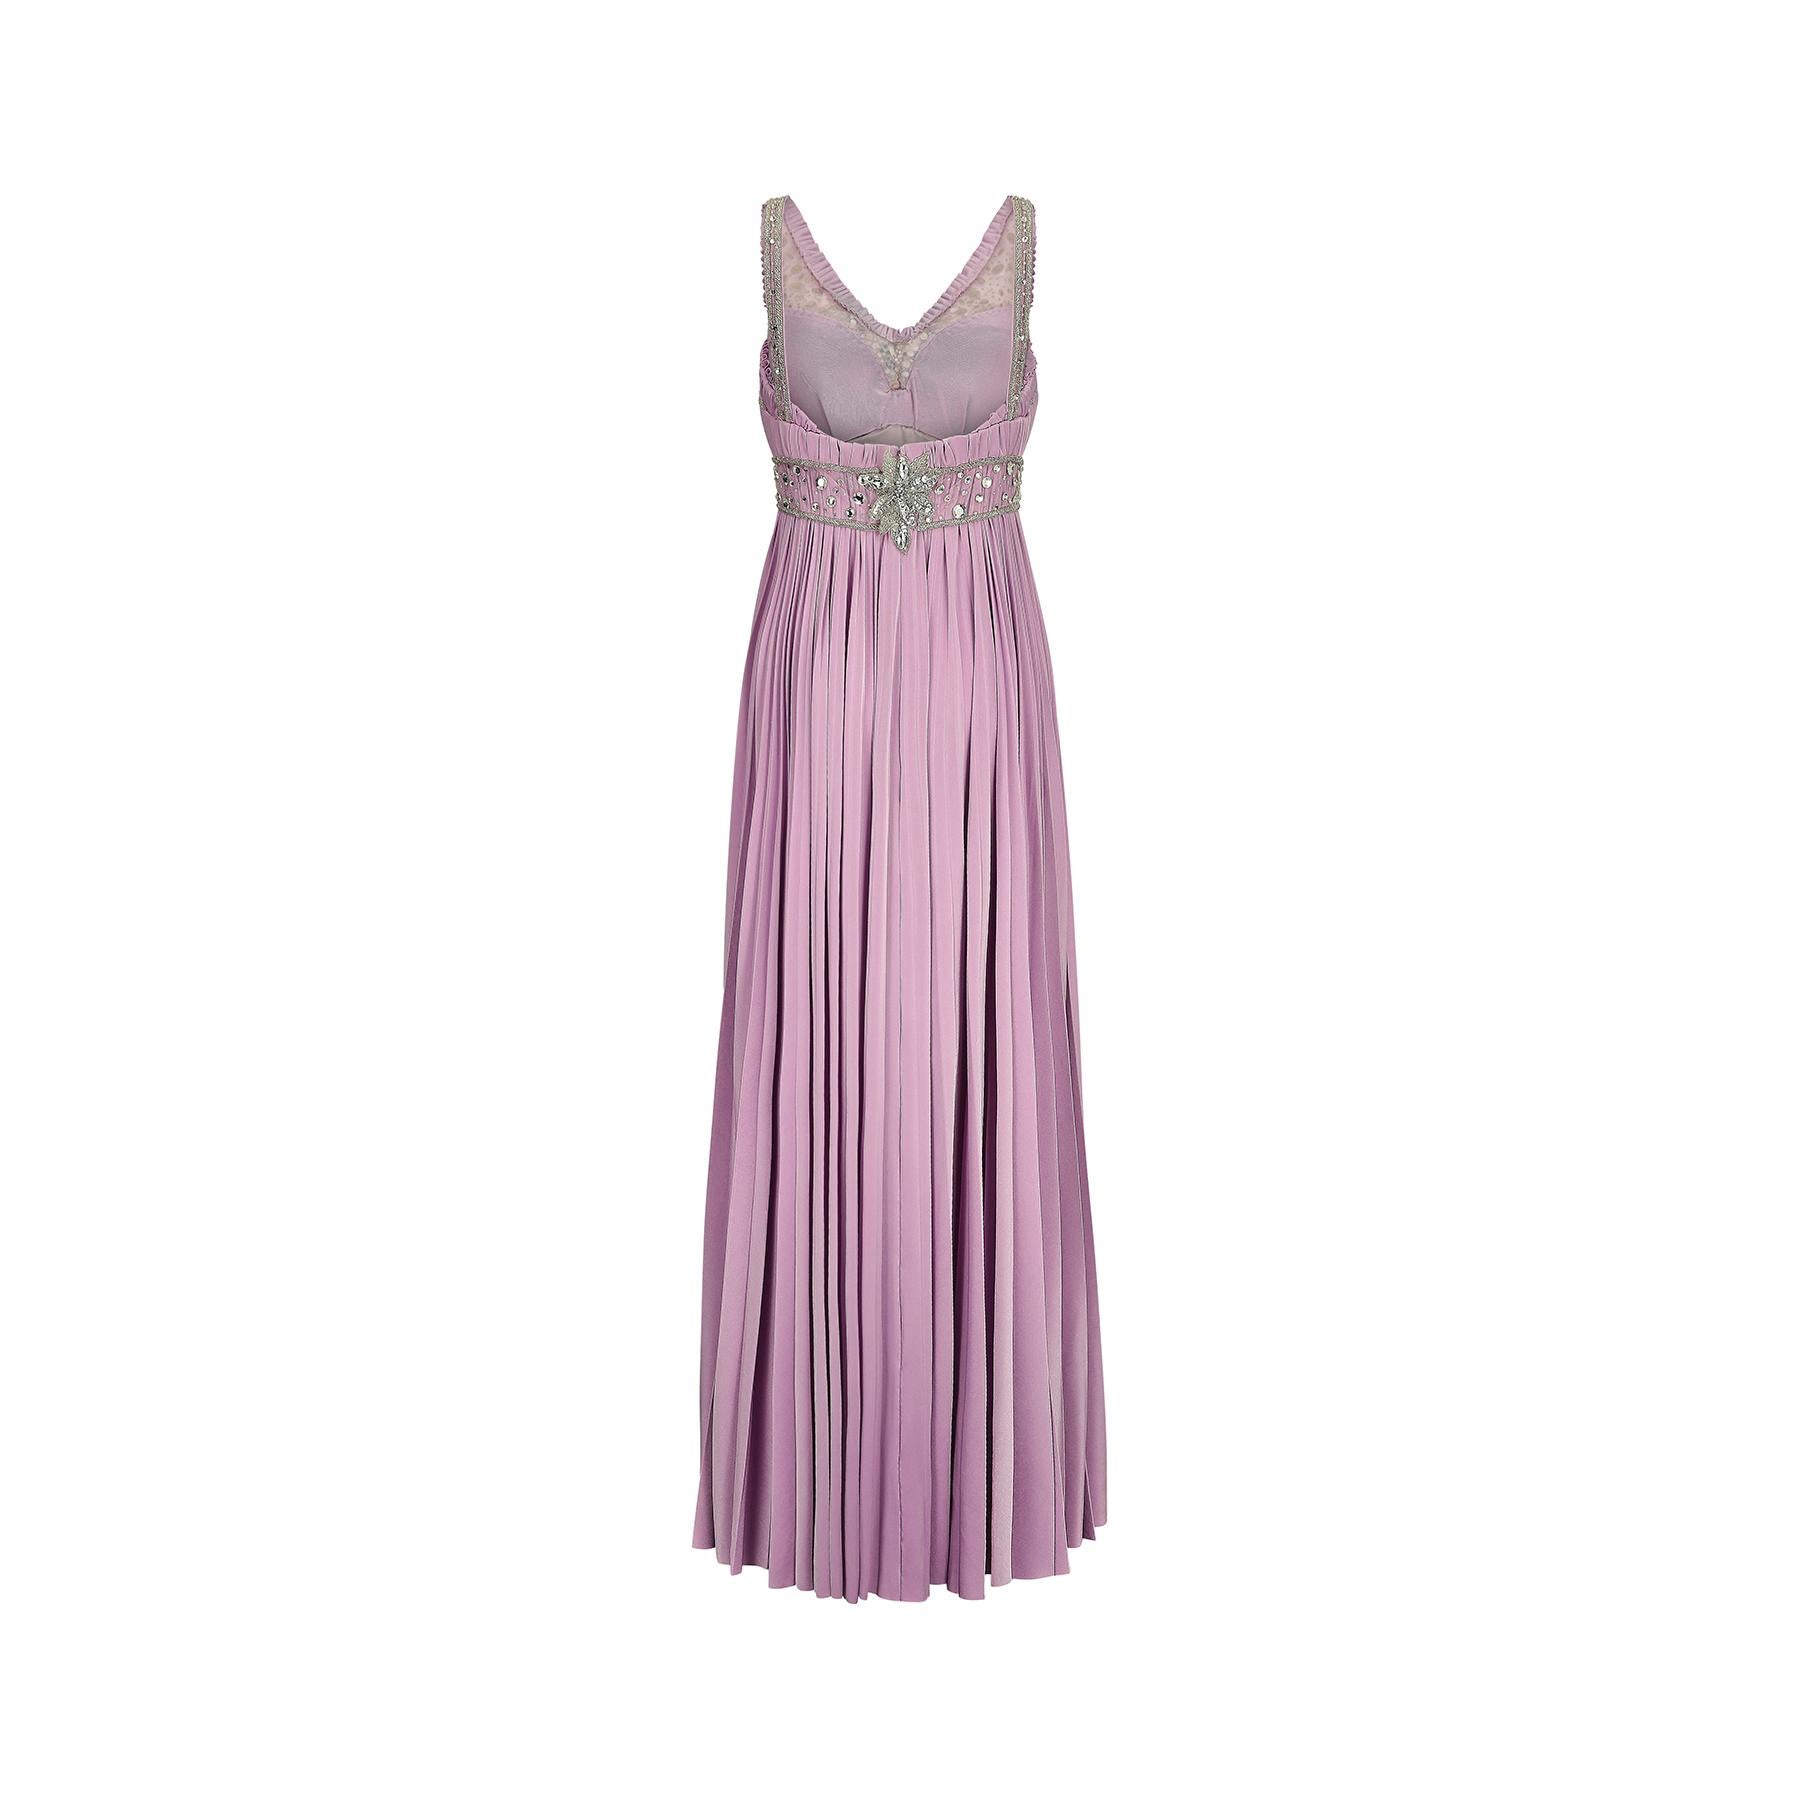 1990s Bespoke Lilac Crystal-Embellished Gown In Excellent Condition For Sale In London, GB